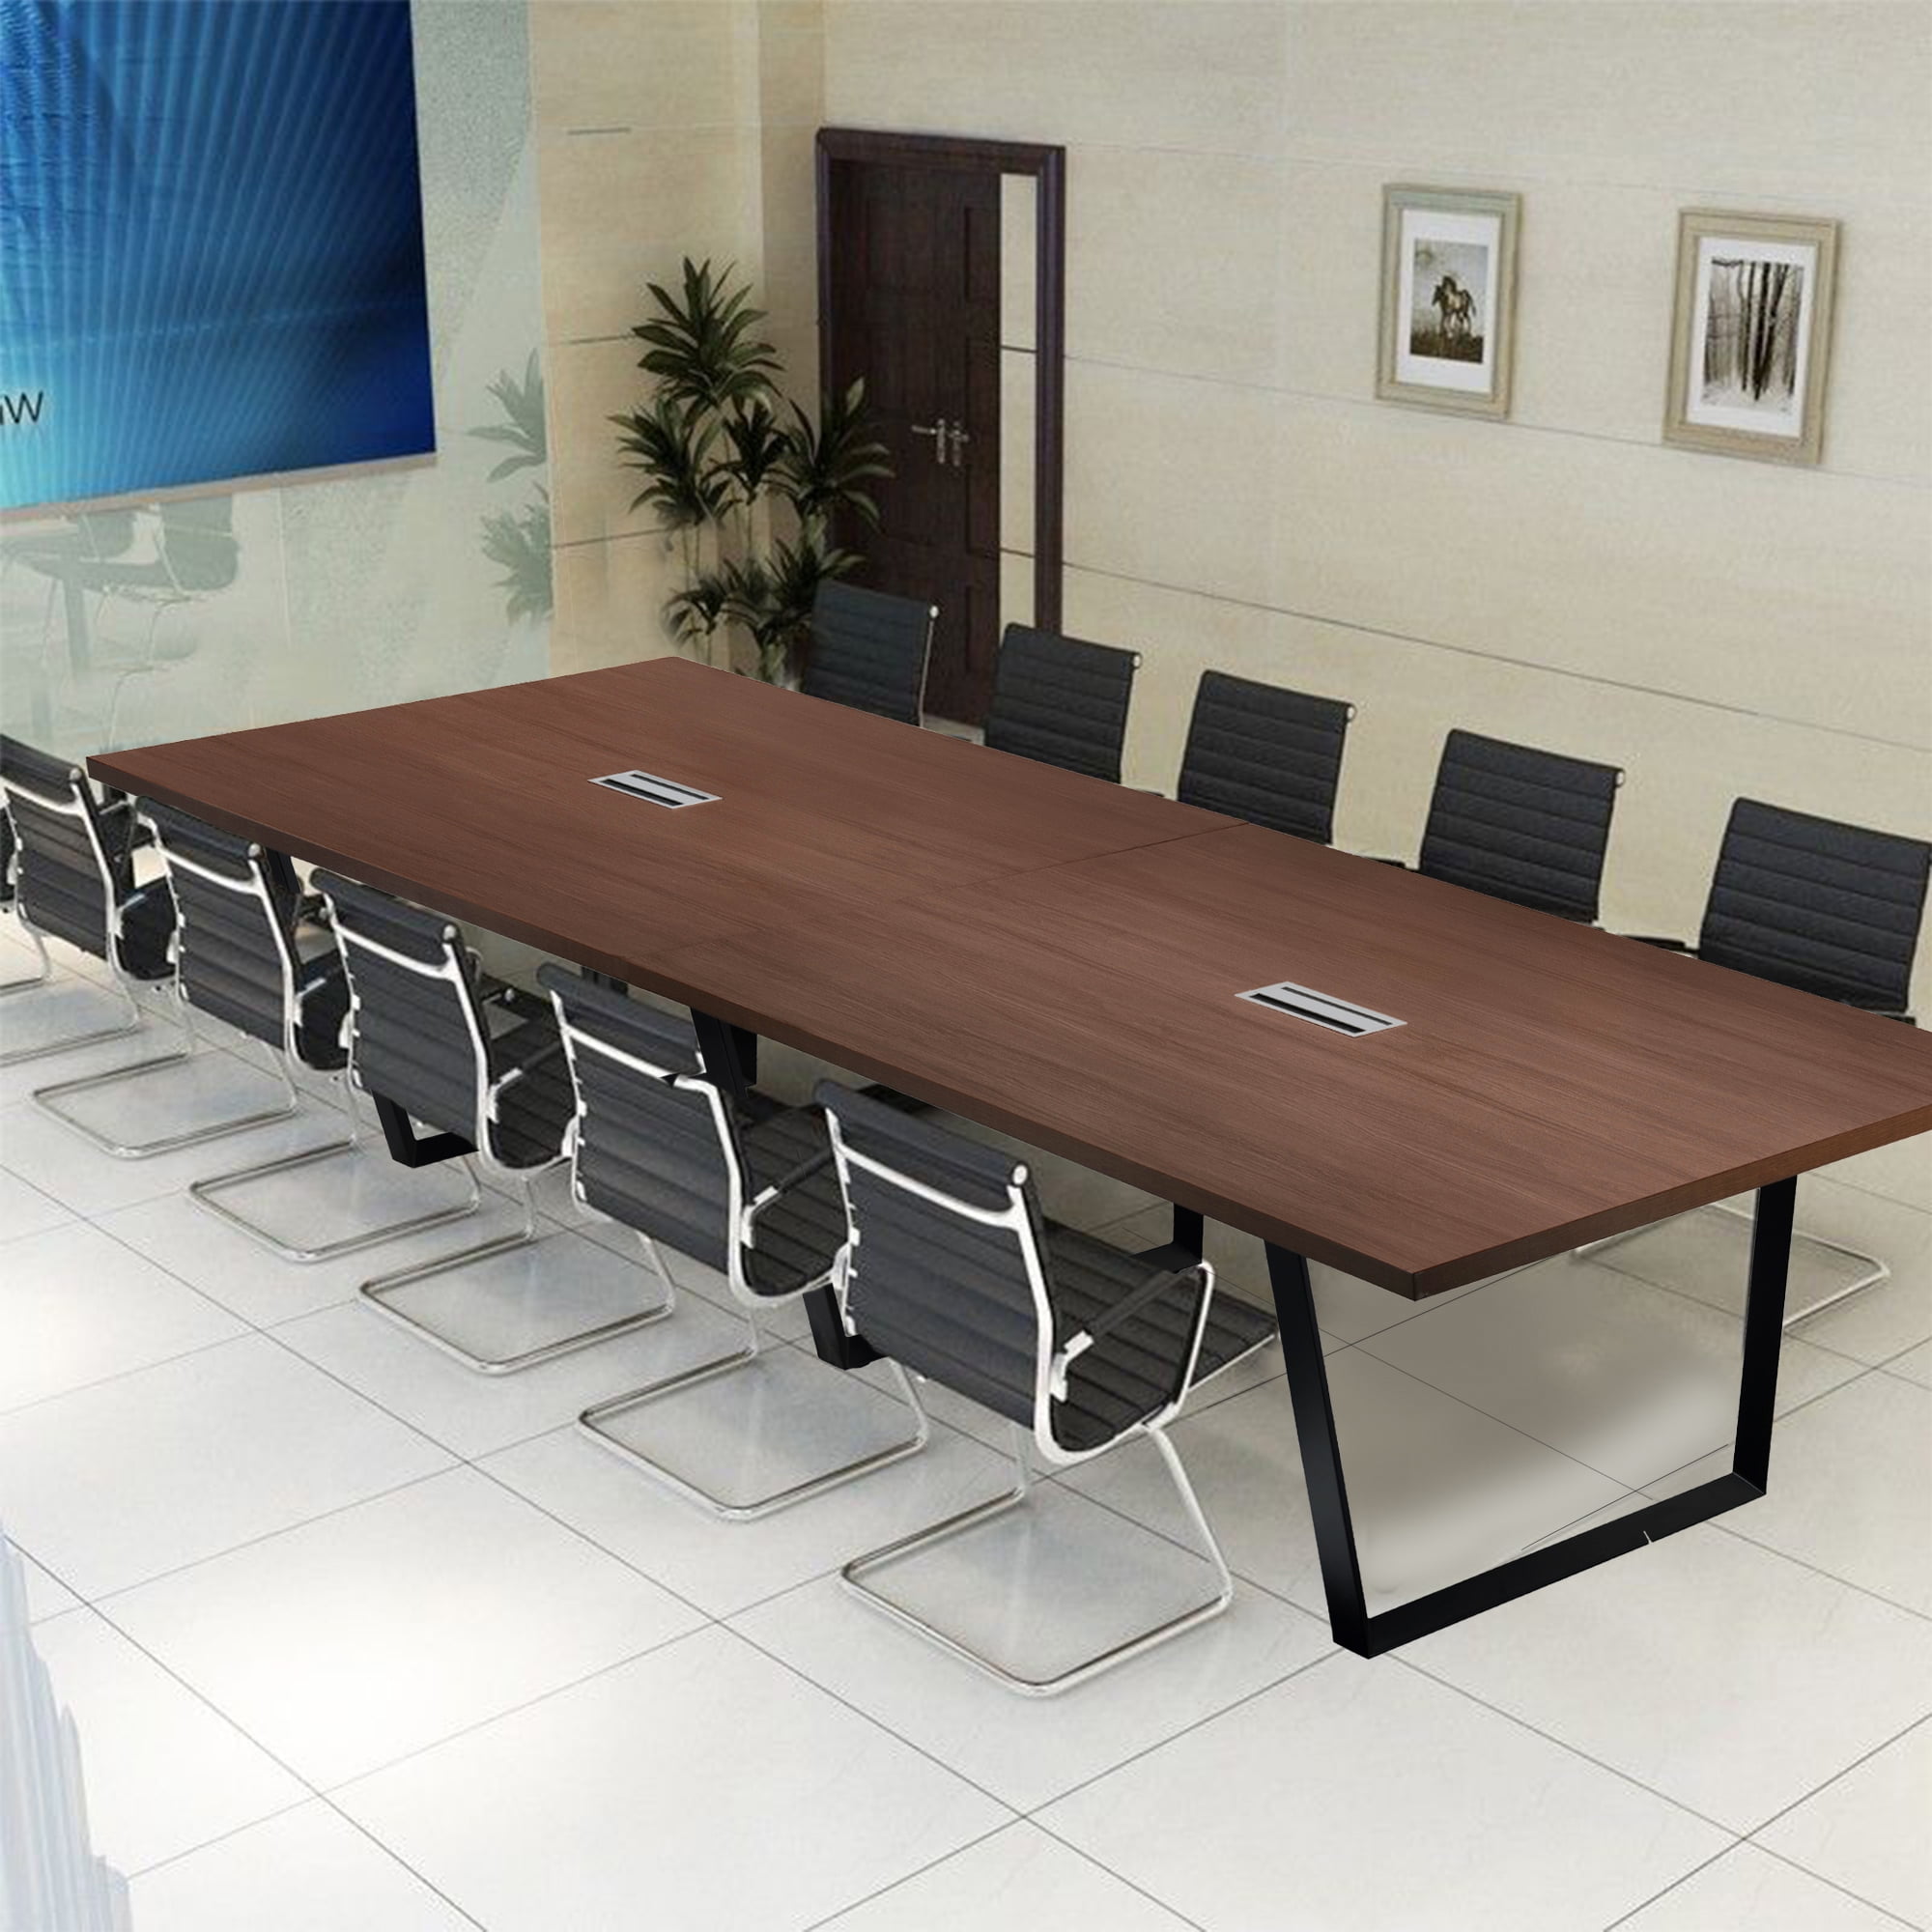 Conference table legs - mumuxpress